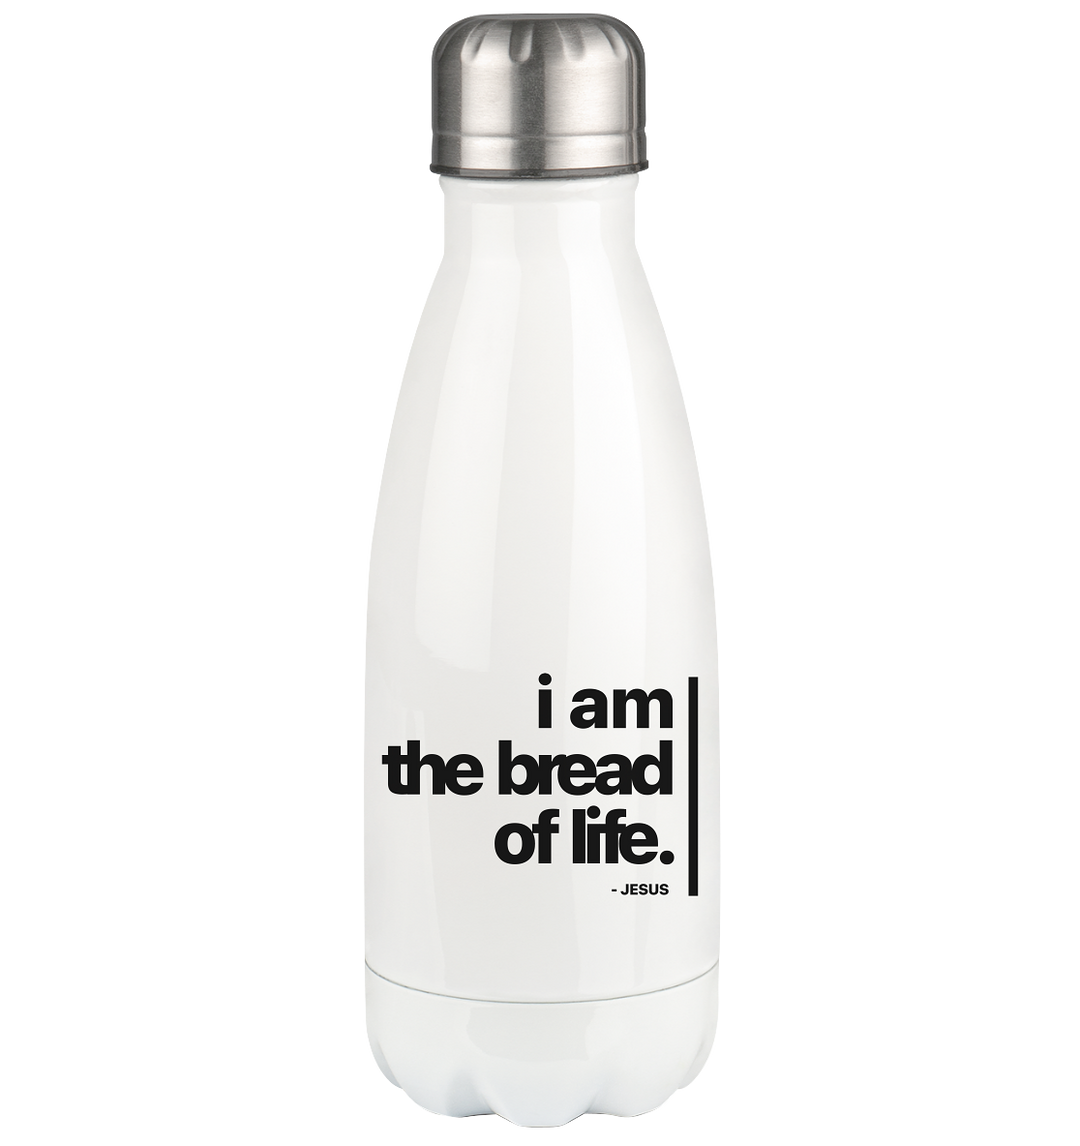 Bread Of Life - Thermoflasche 350ml